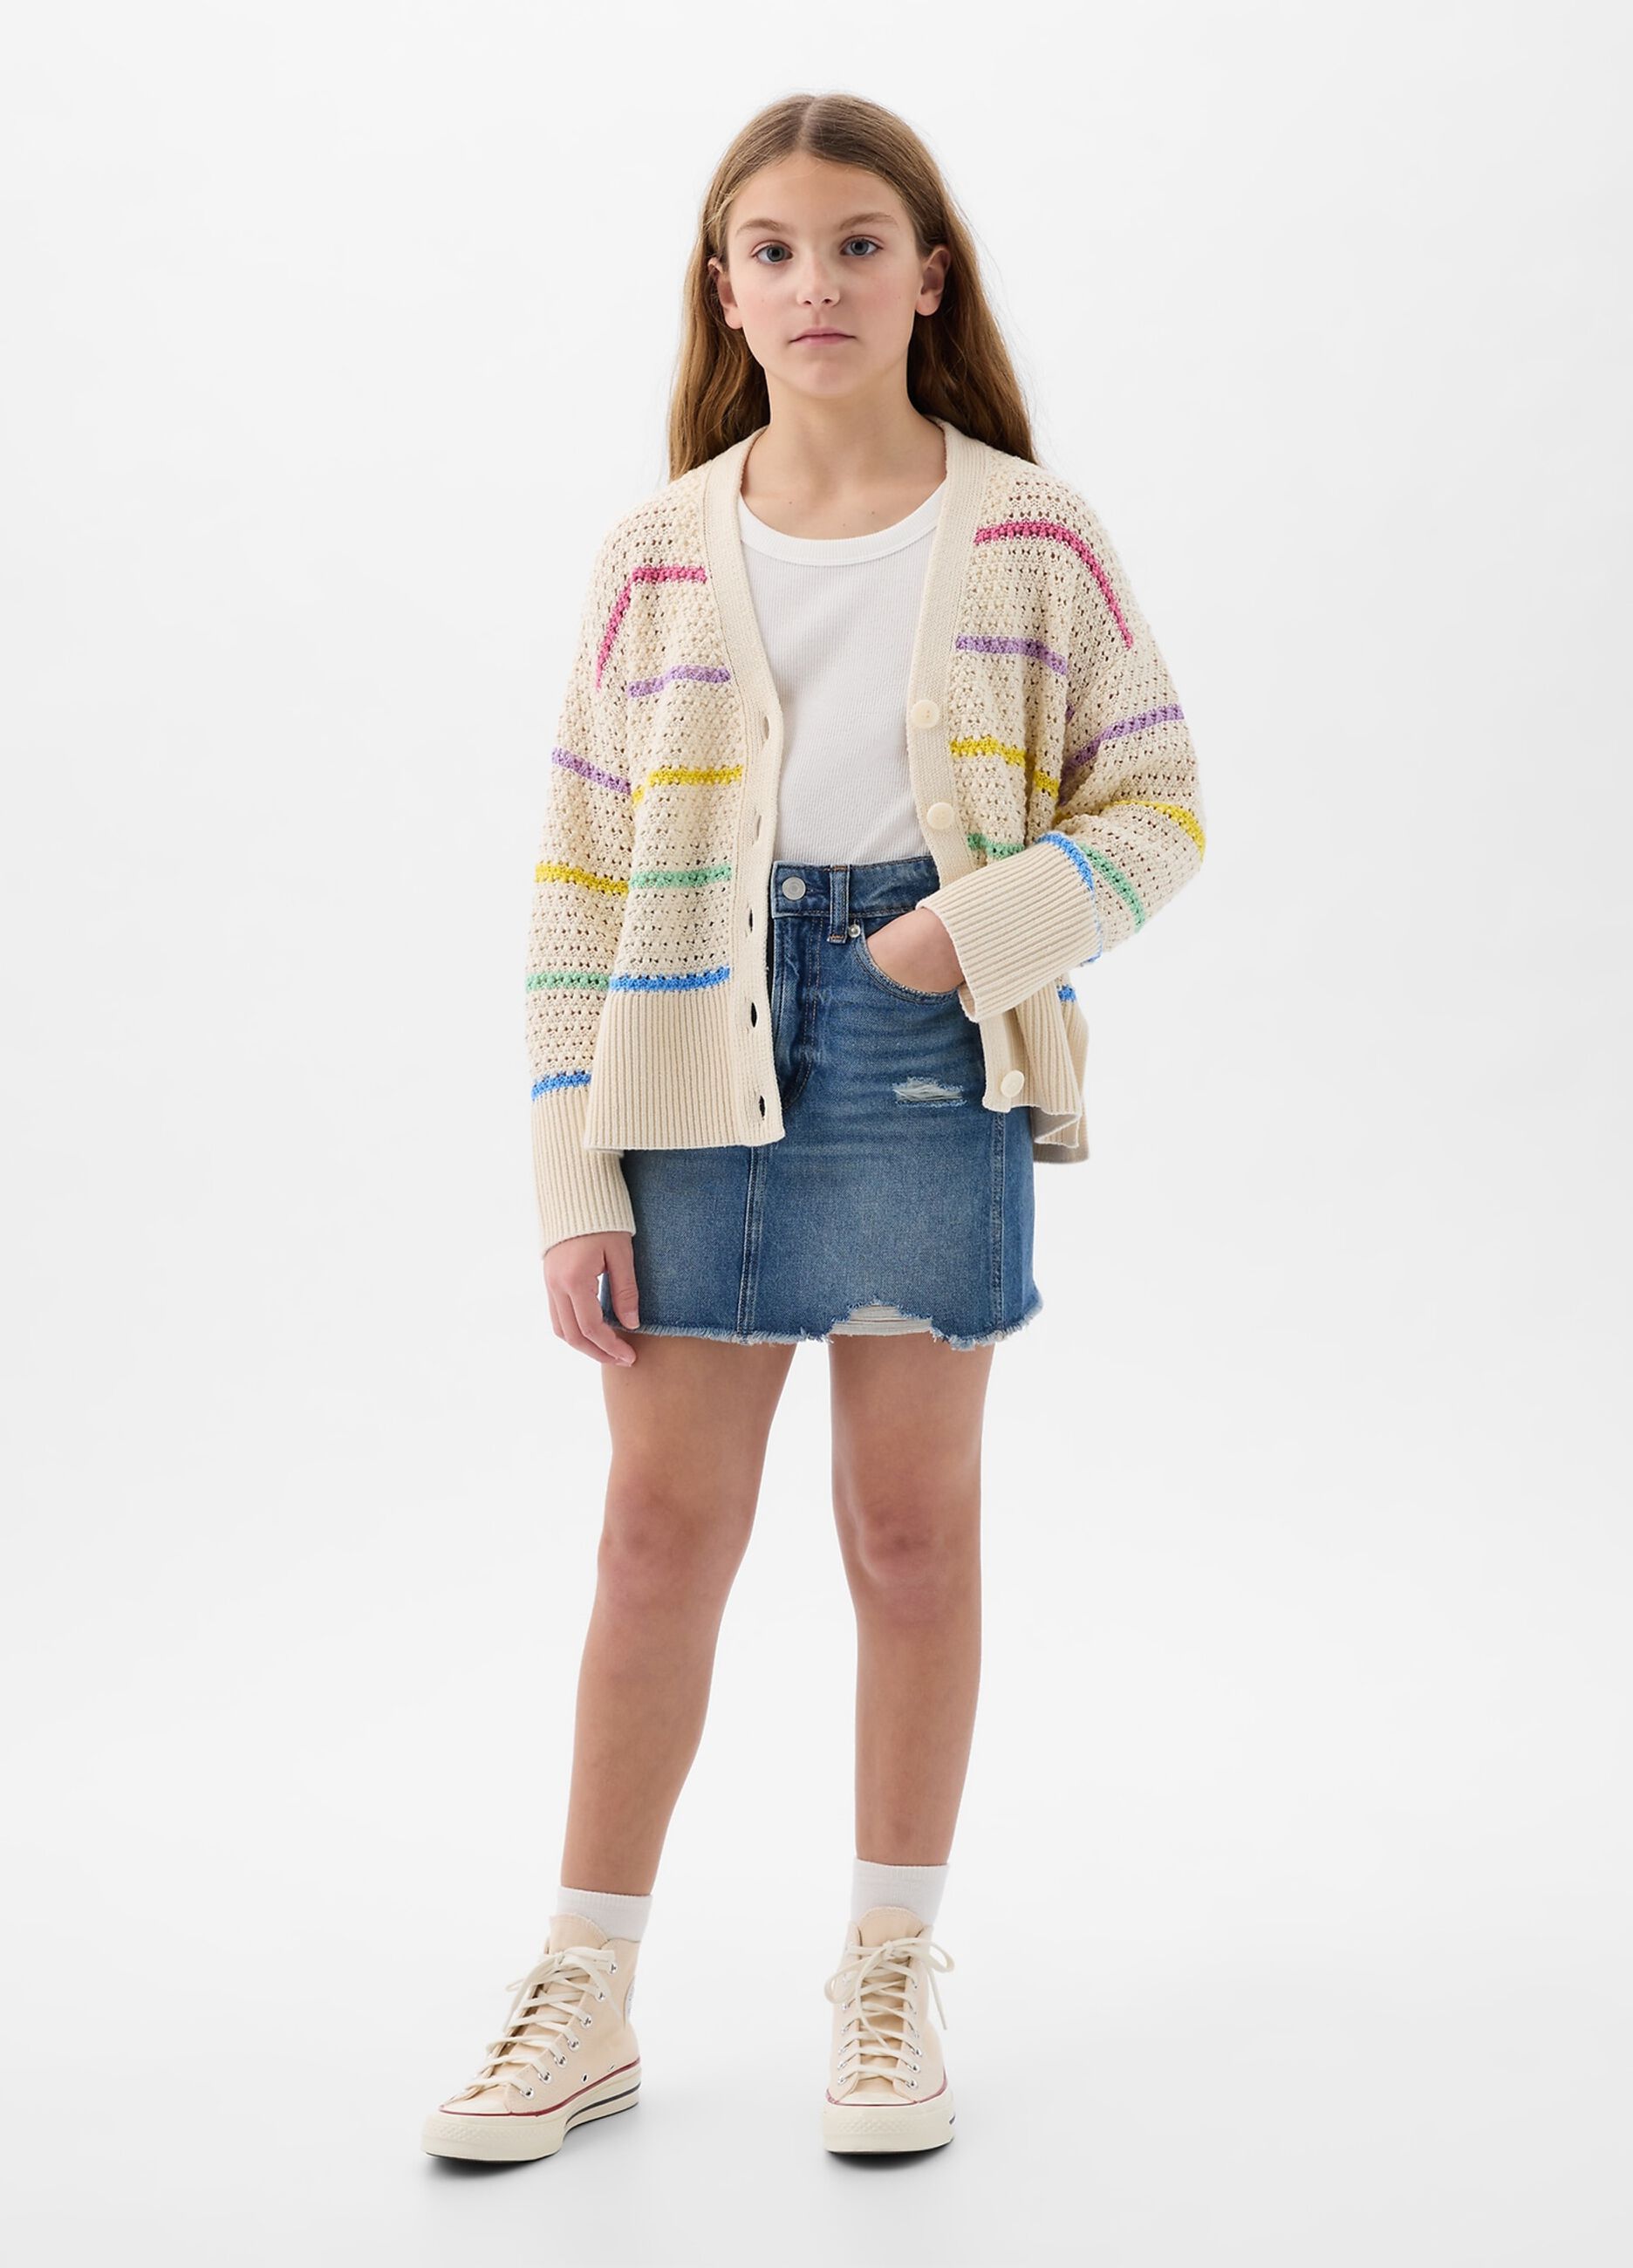 Cardigan with multicoloured striped pointelle stitch